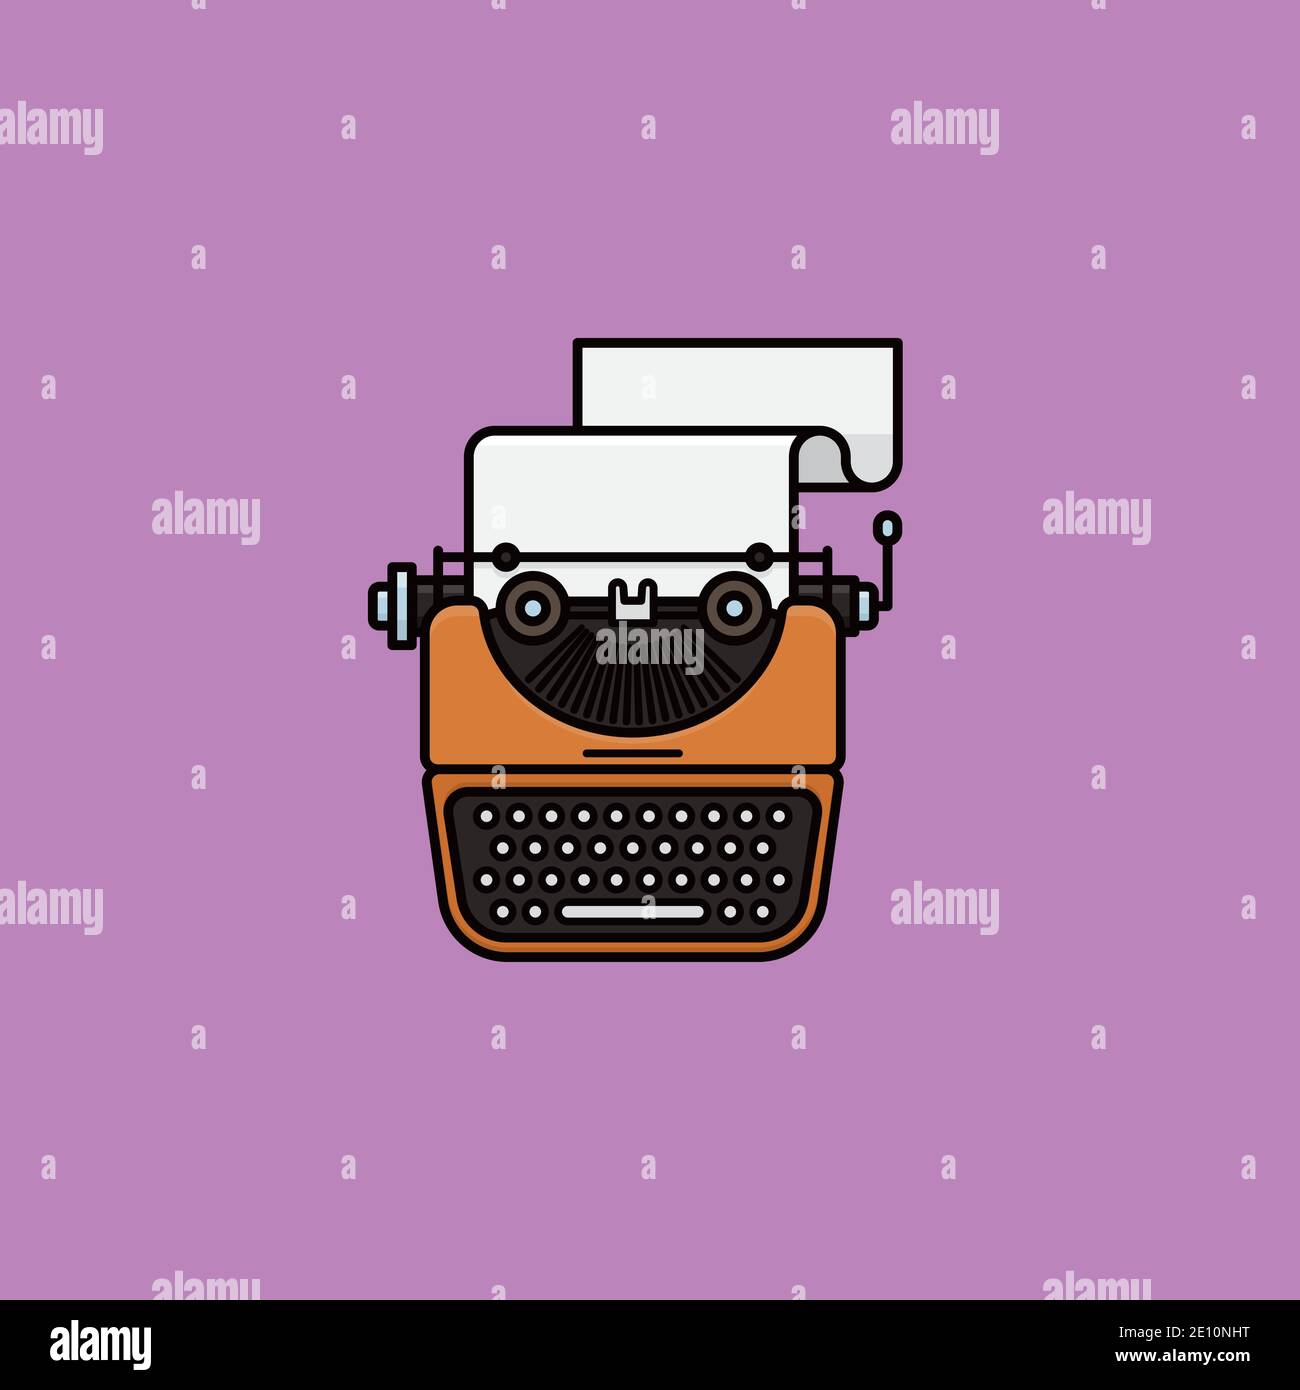 170+ Purple Typewriter Stock Photos, Pictures & Royalty-Free Images - iStock